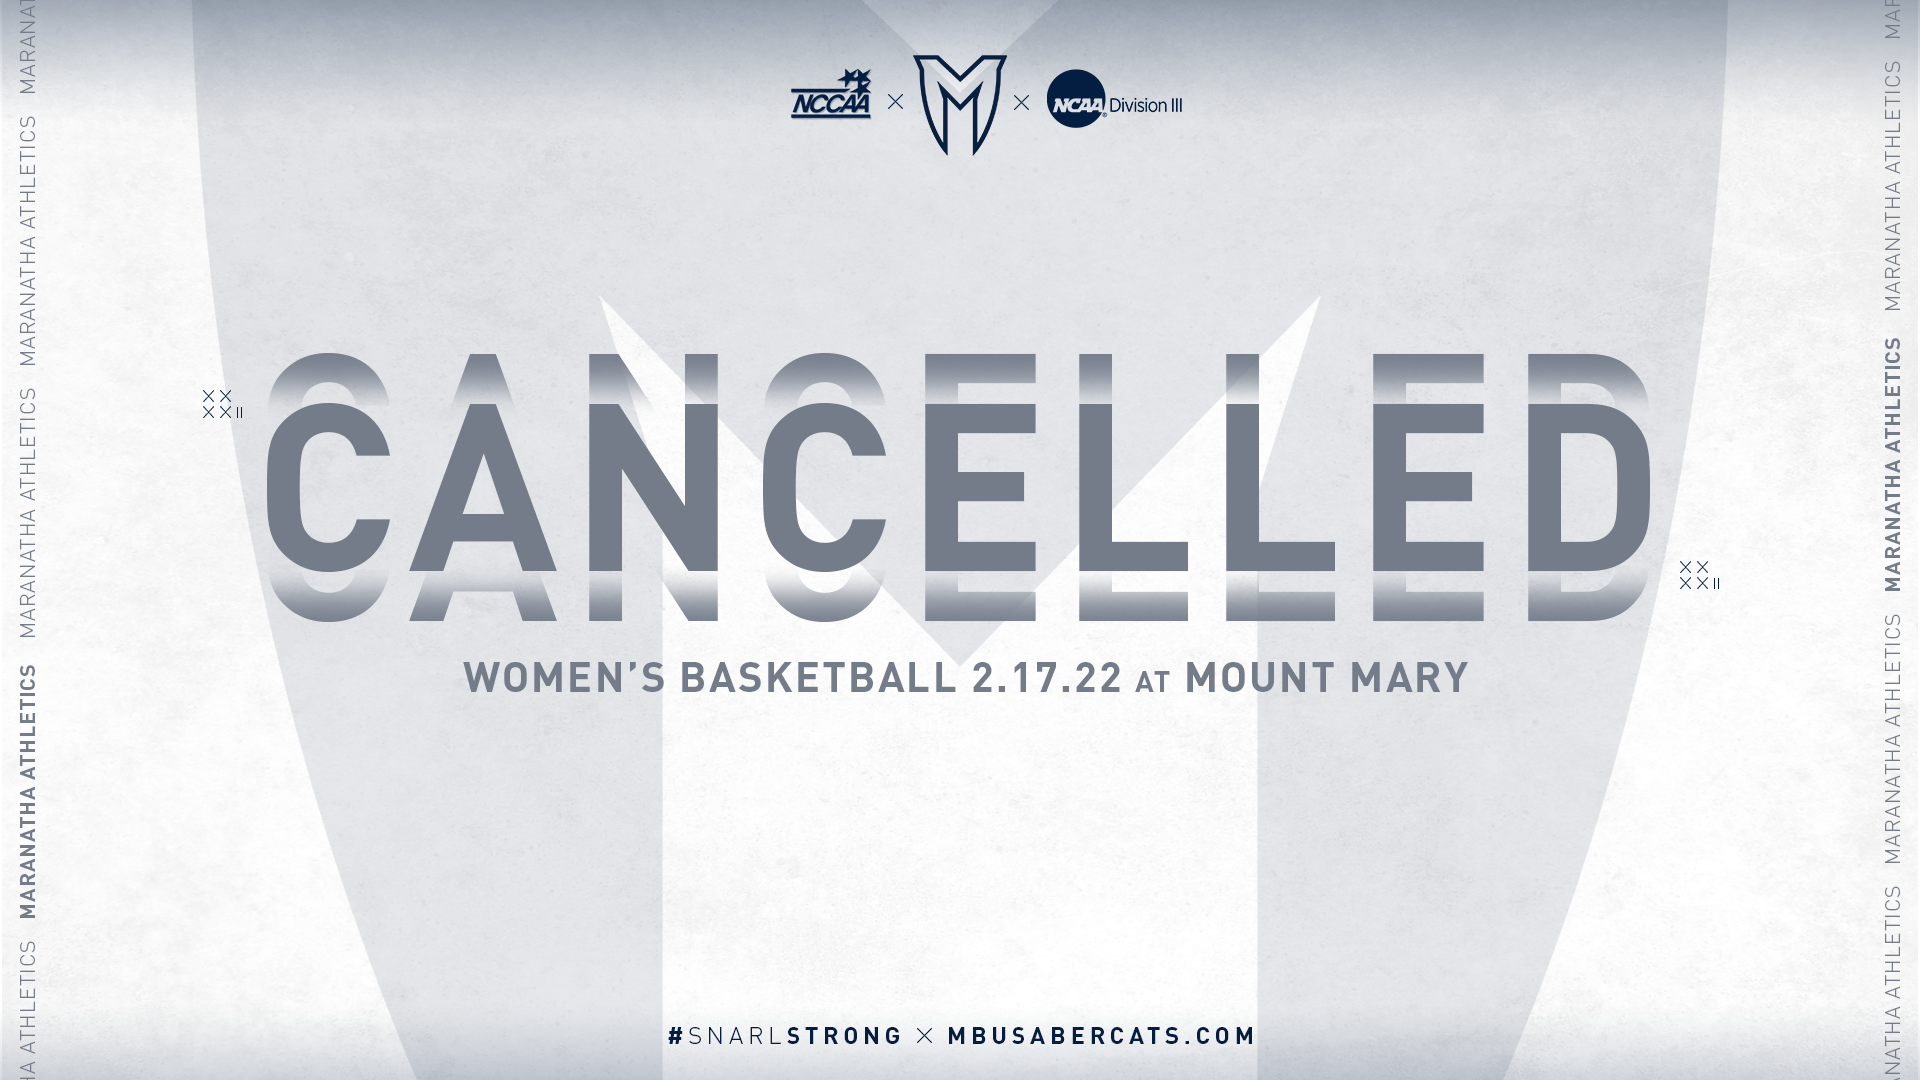 February 17th Women's Basketball Game Cancelled